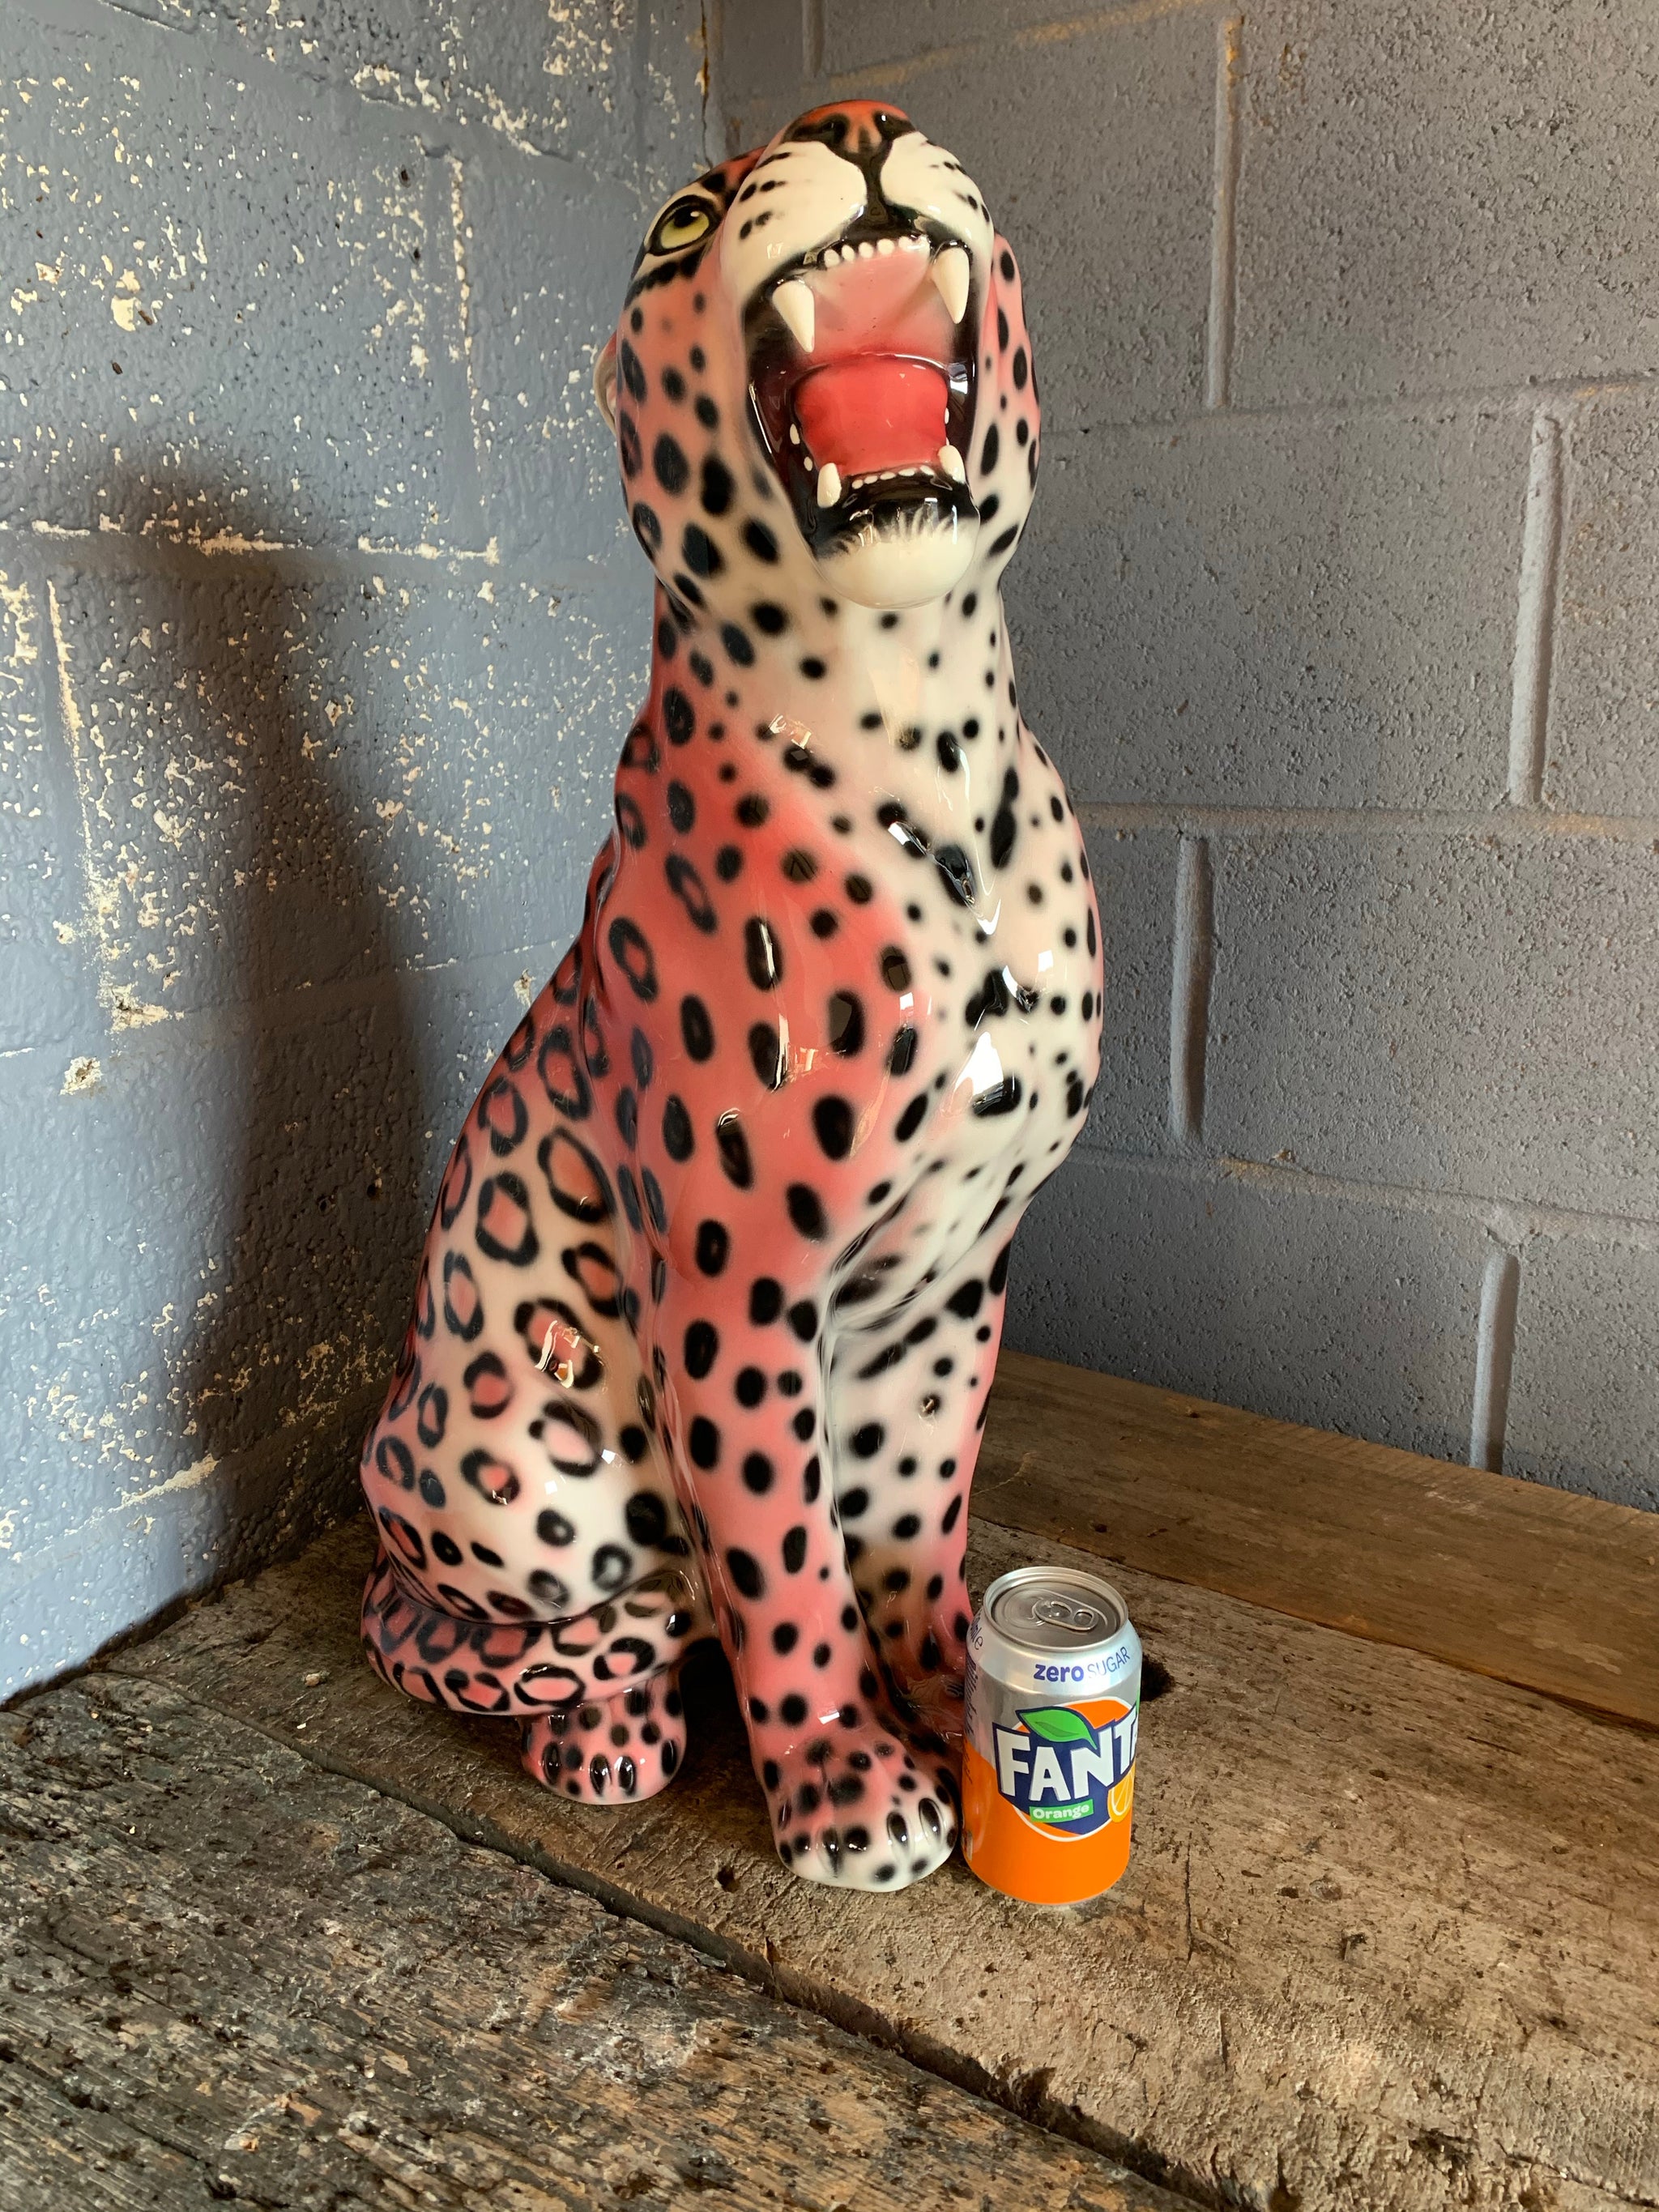 A large pink ceramic leopard statue made in Italy - Belle and Beast Emporium